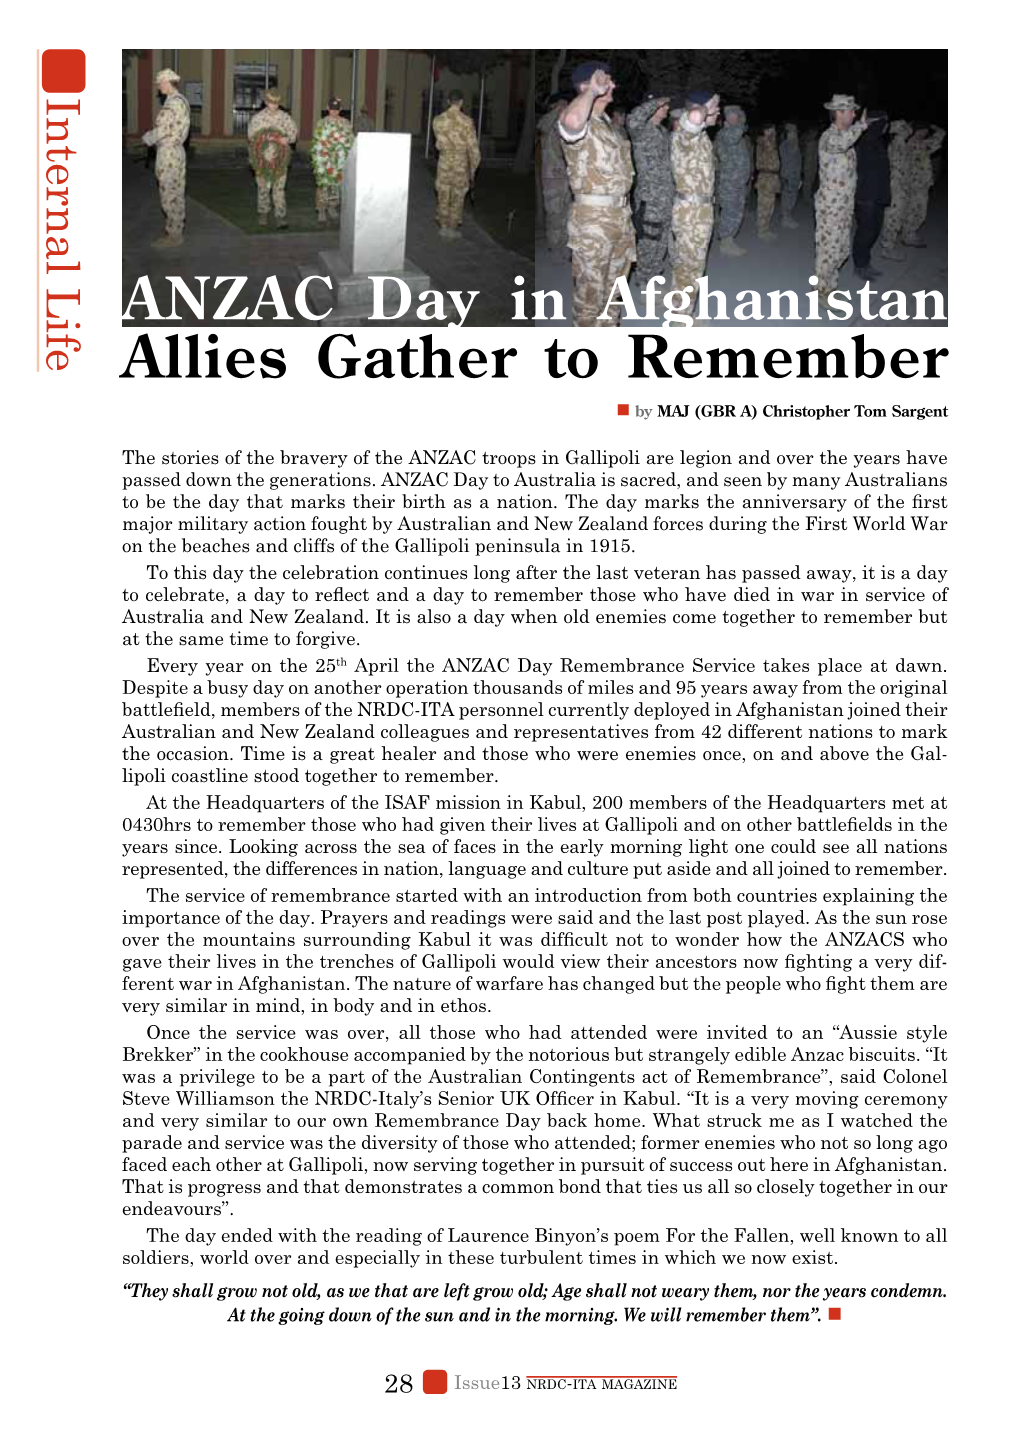 Anzac Day in Afghanistan Allies Gather to Remember  by MAJ (GBR A) Christopher Tom Sargent